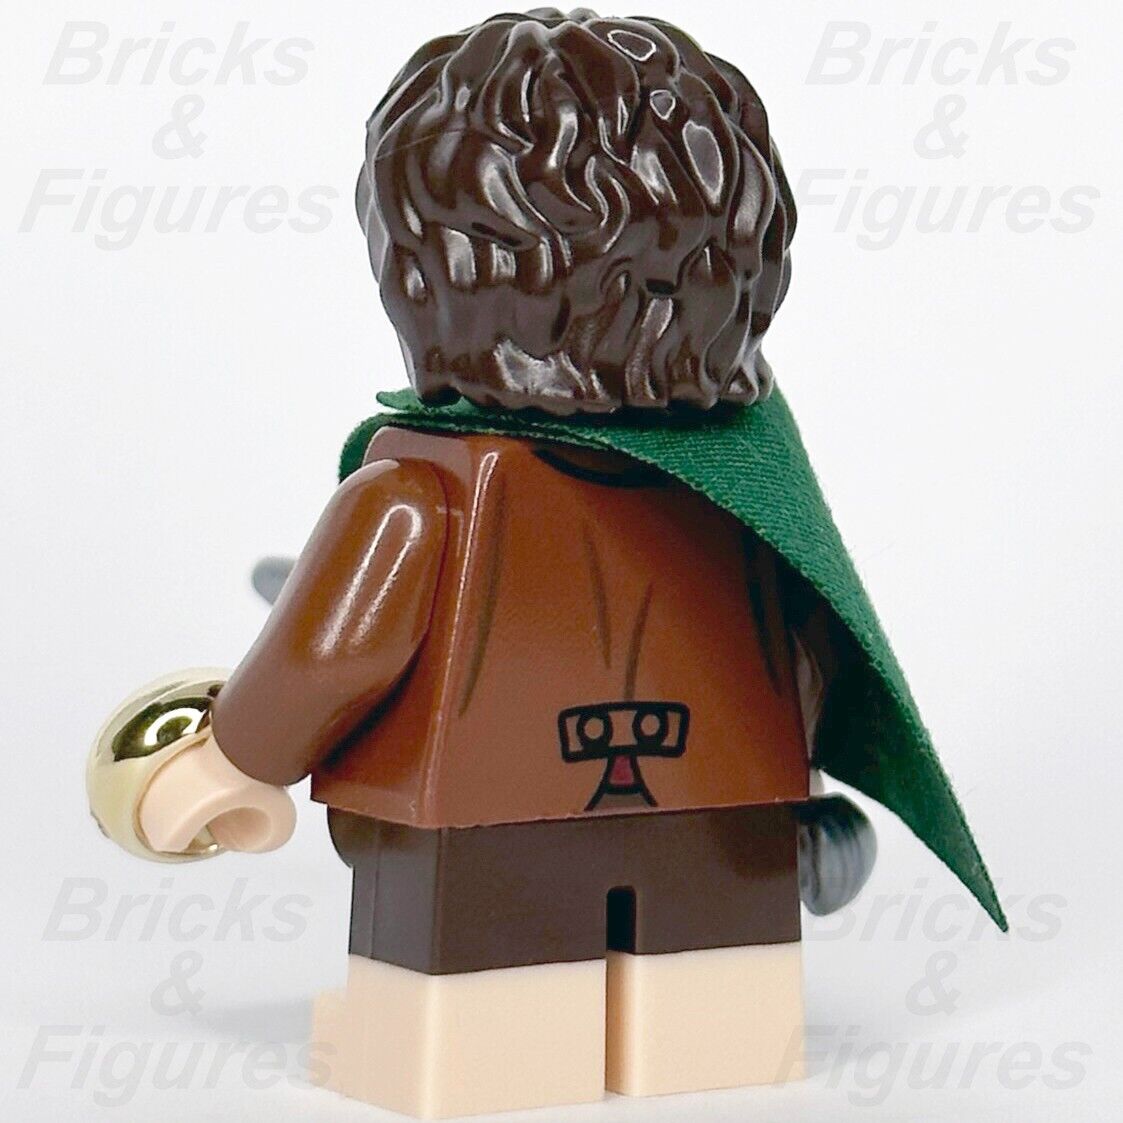 LEGO Frodo Baggins Minifigure The Hobbit & The Lord of the Rings 10316 lor112 - Bricks & Figures